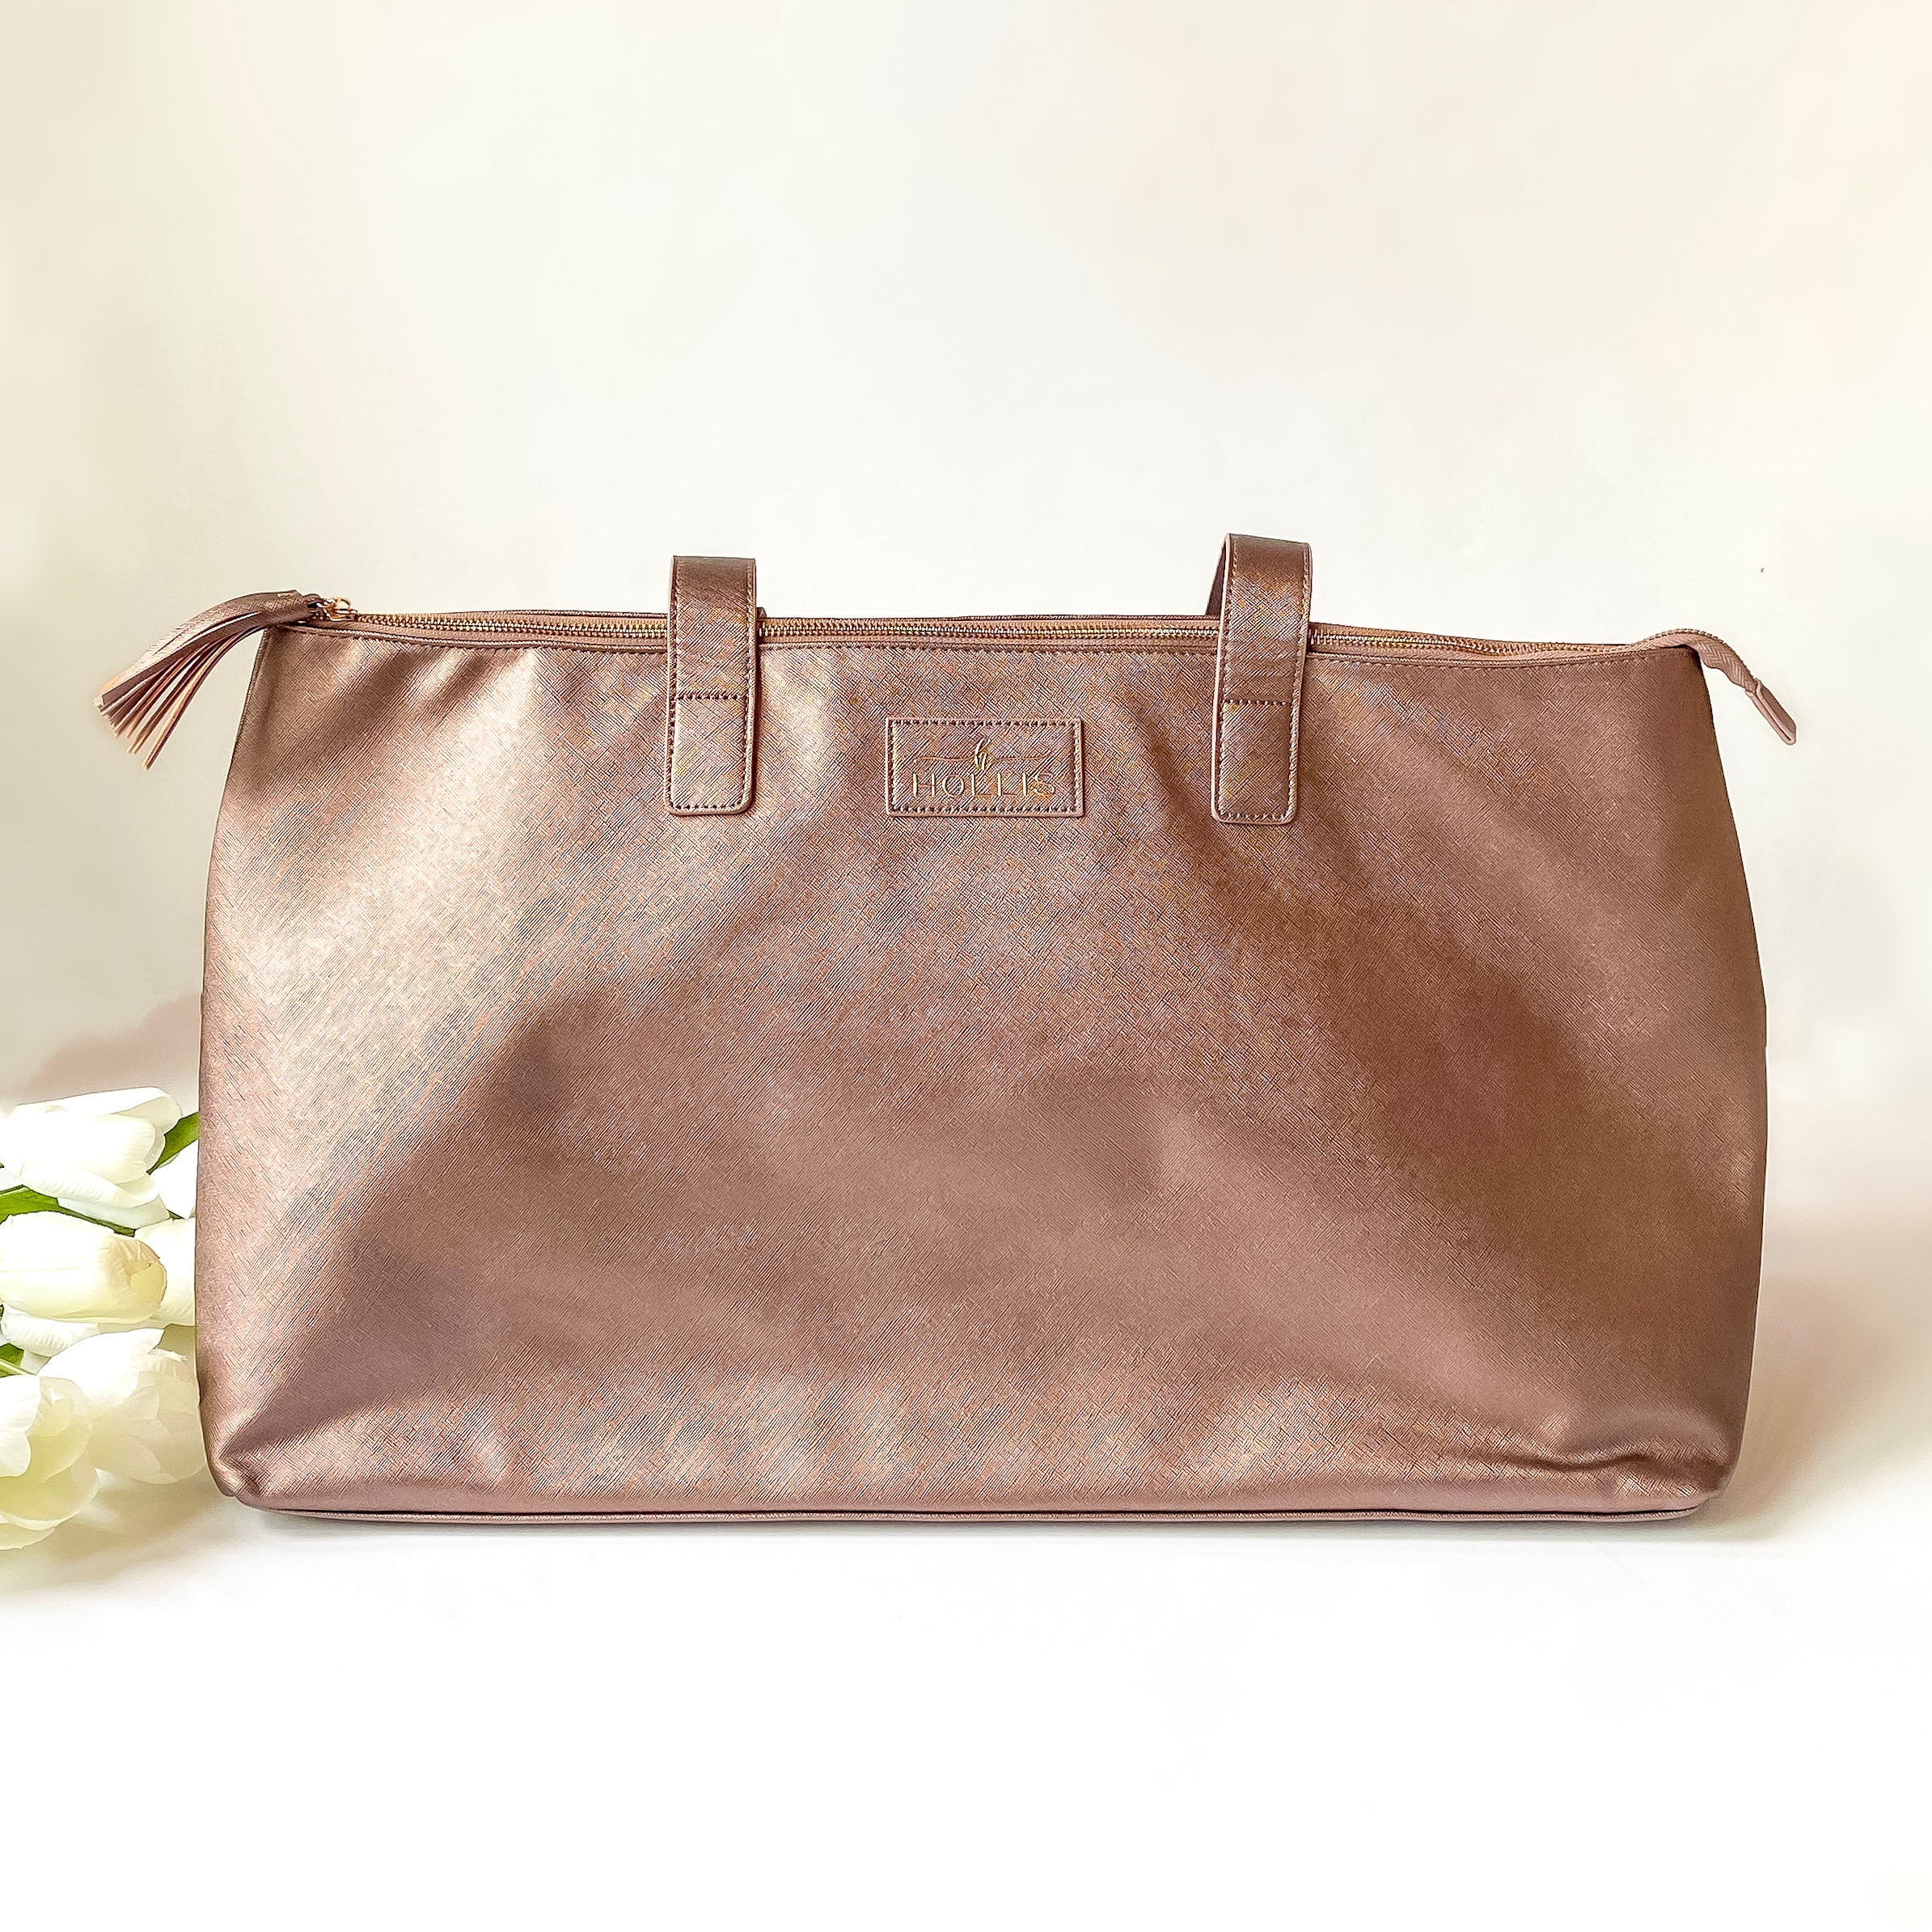 Metallic mocha duffle bag with a top zipper and metallic mocha handles. This bag is pictured on a white background with white flowers on the left side of the bag. 